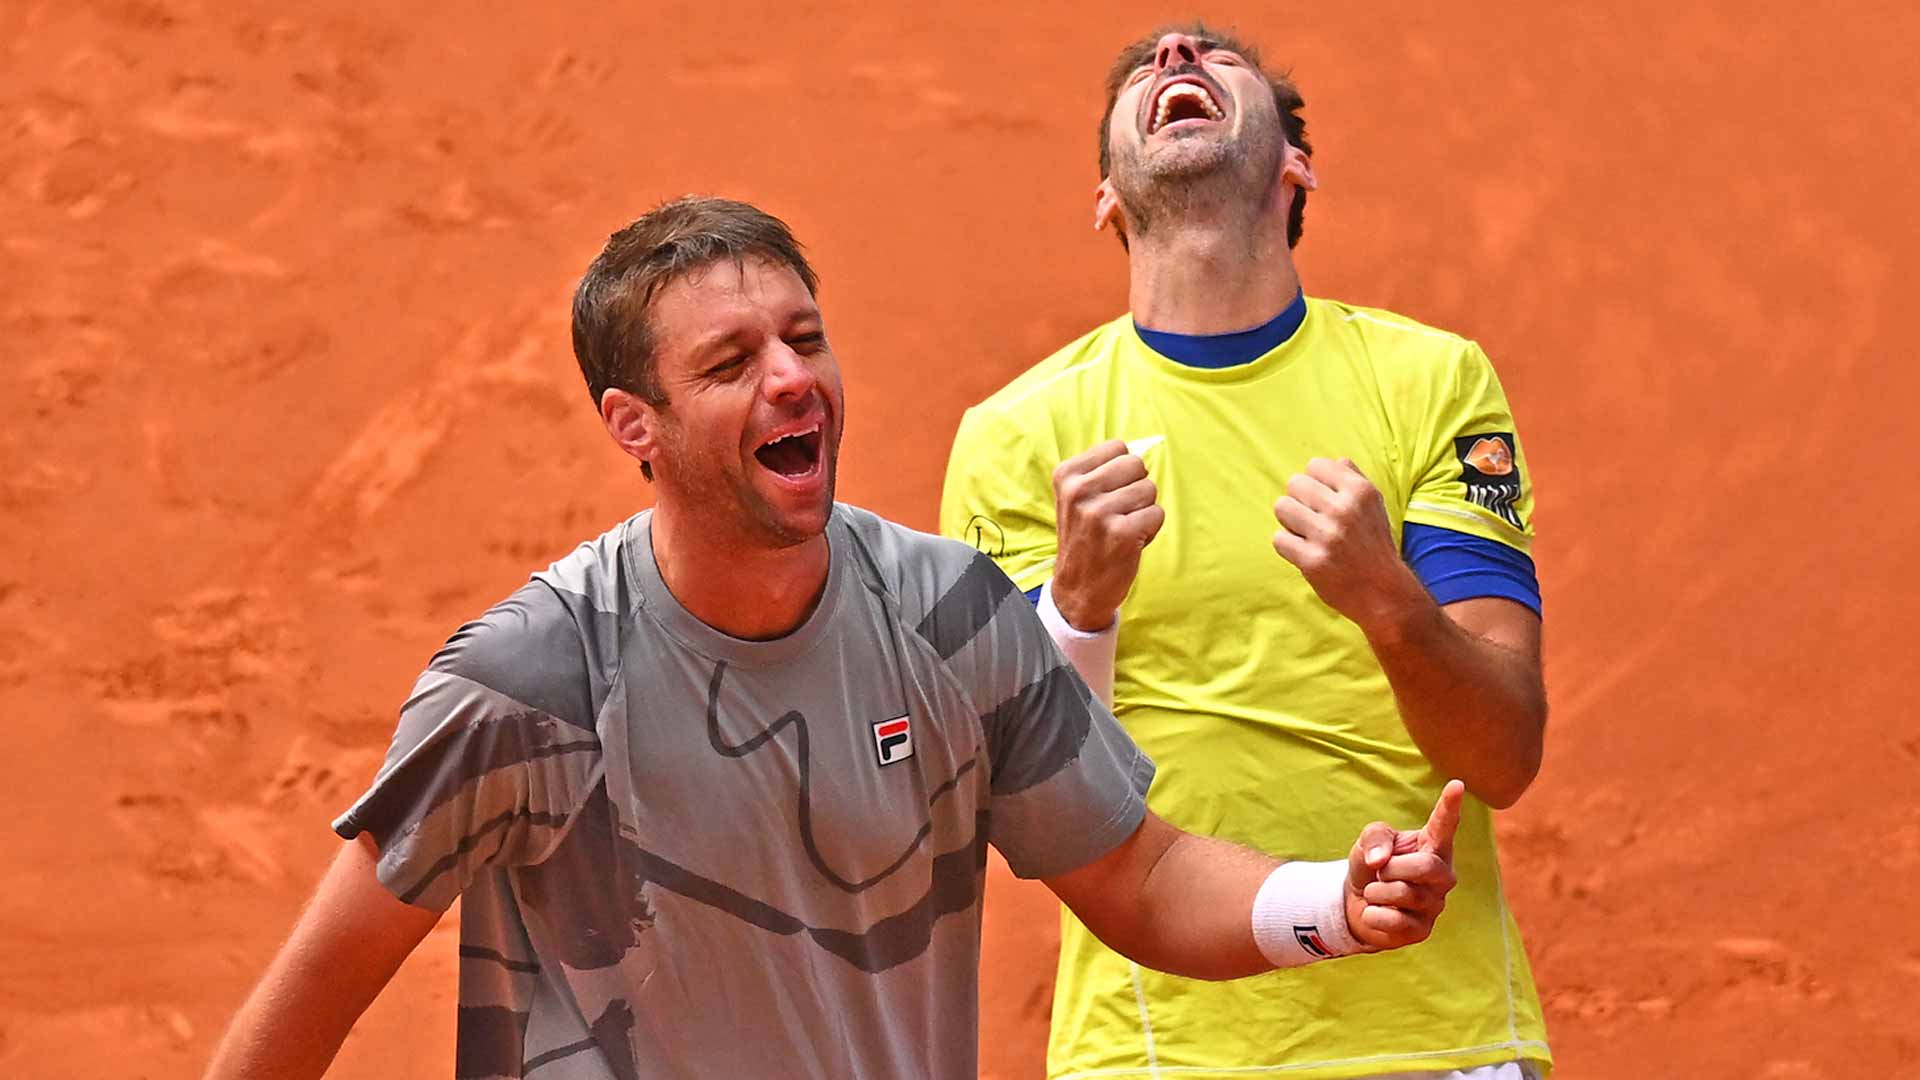 Horacio Zeballos and Marcel Granollers celebrate their dramatic quarter-final victory on Thursday in Madrid.